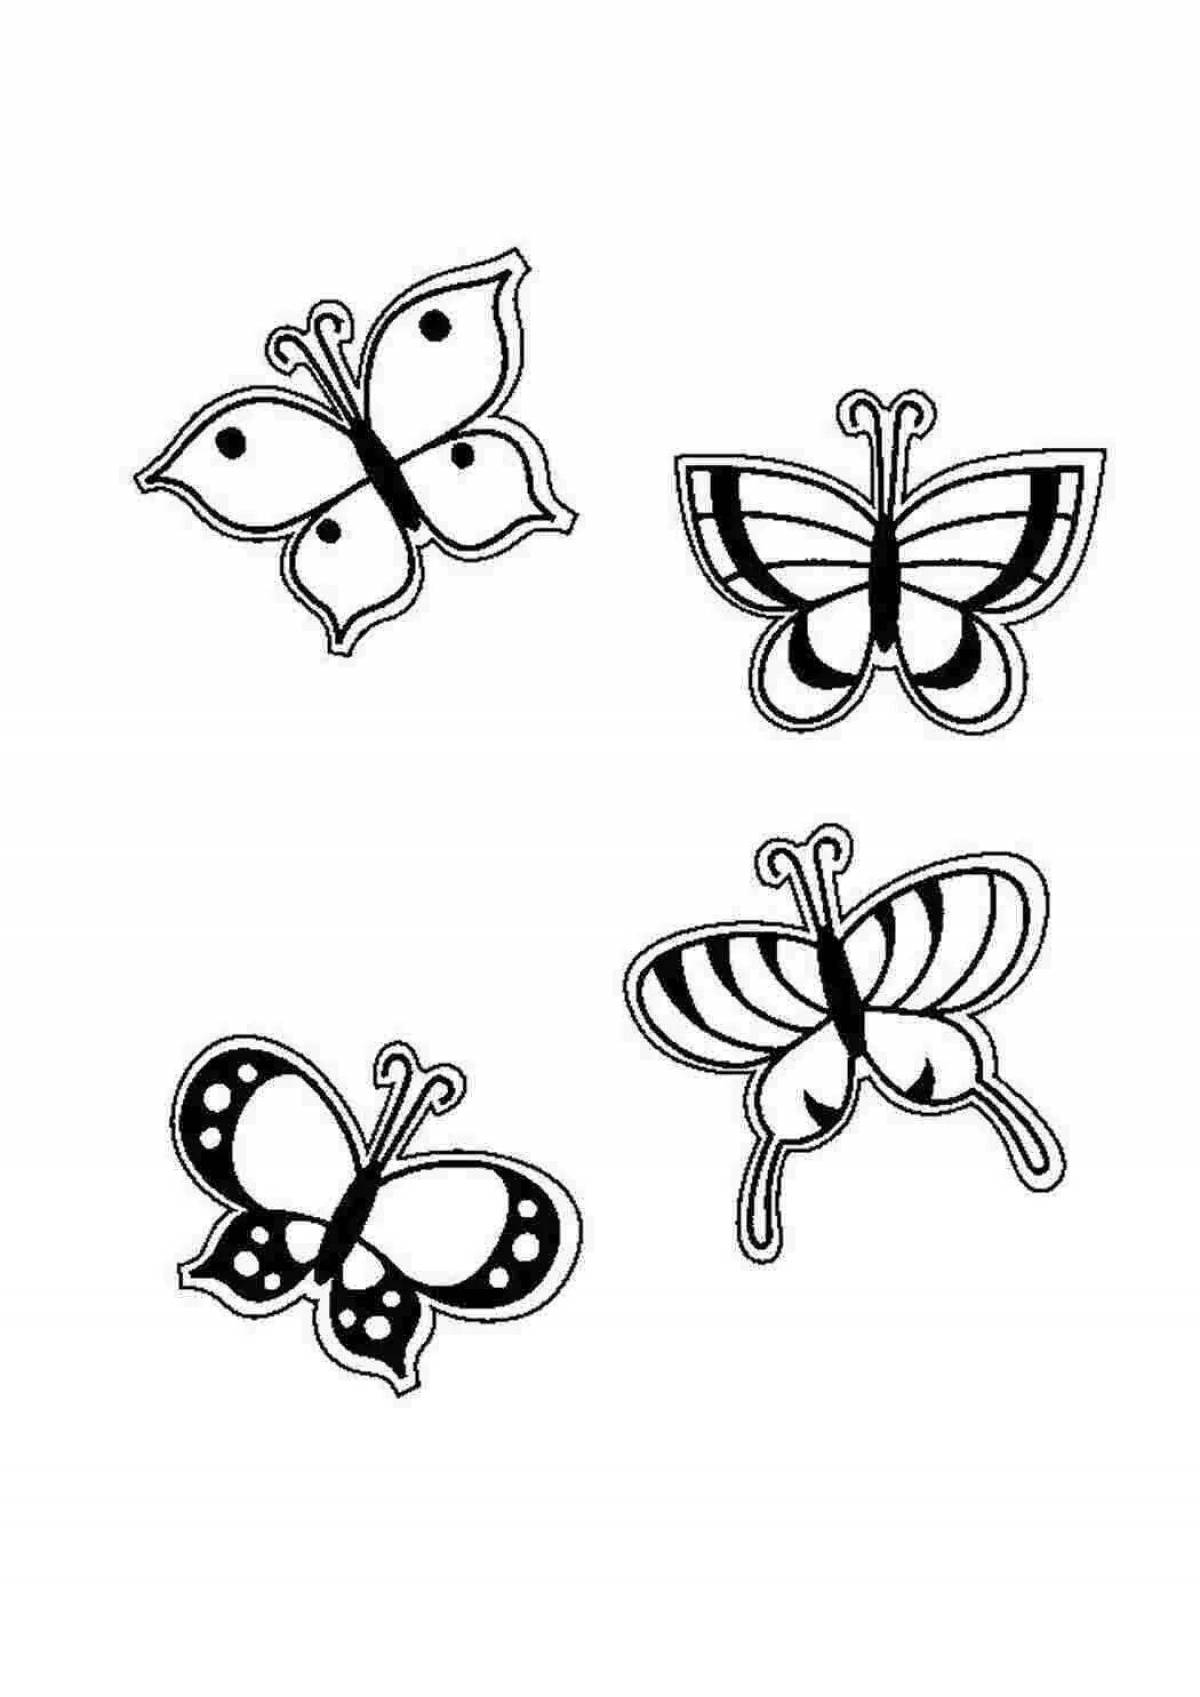 Joyful coloring pages of butterflies